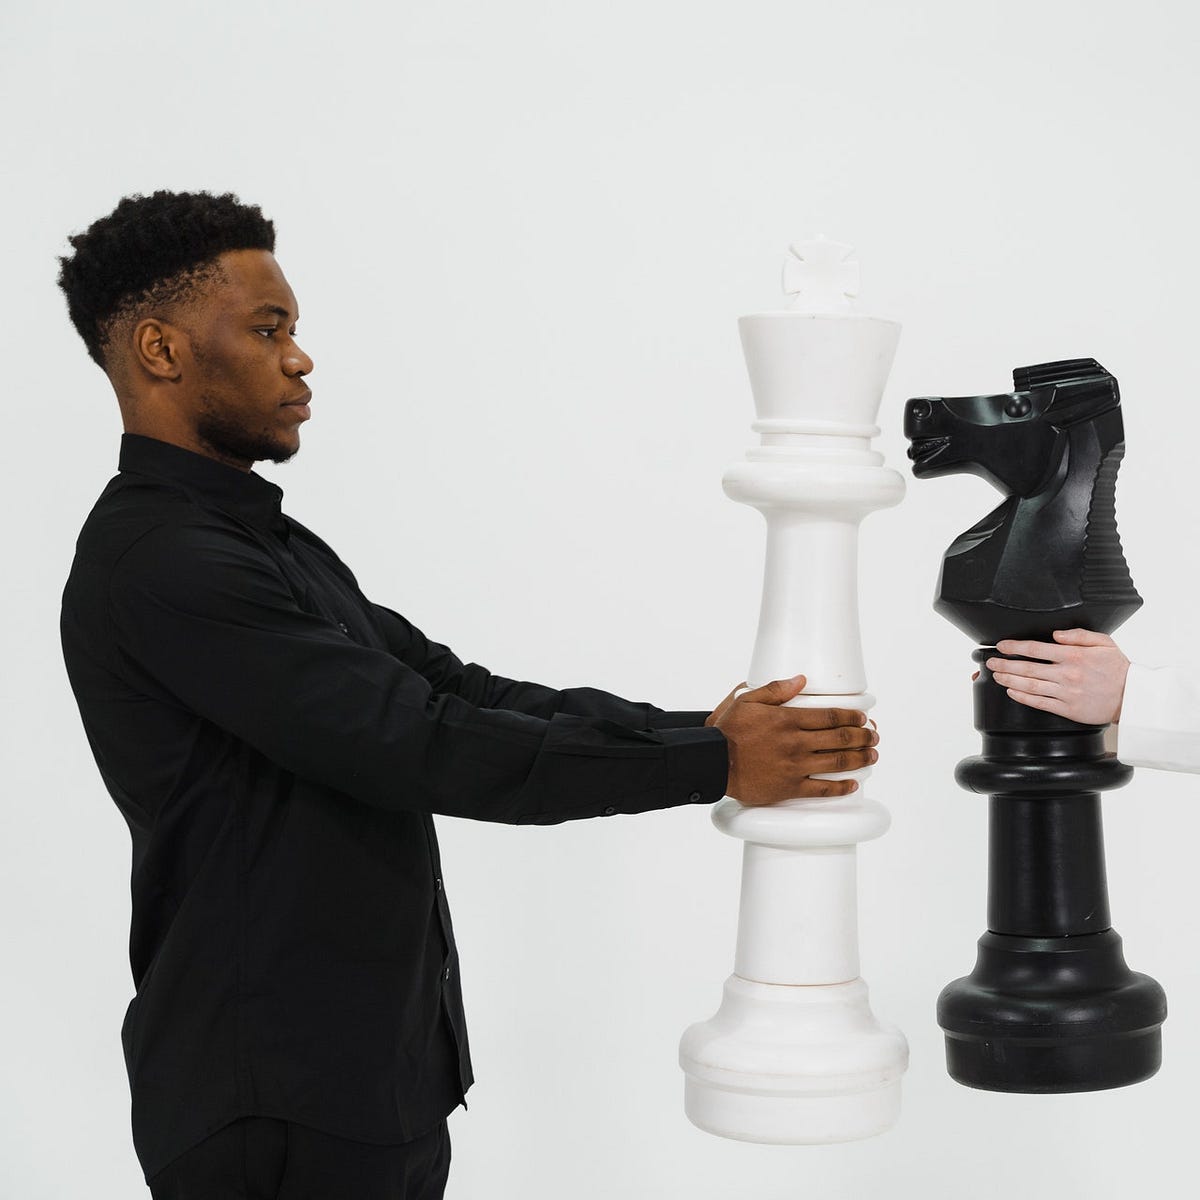 The Power of Each Chess Piece